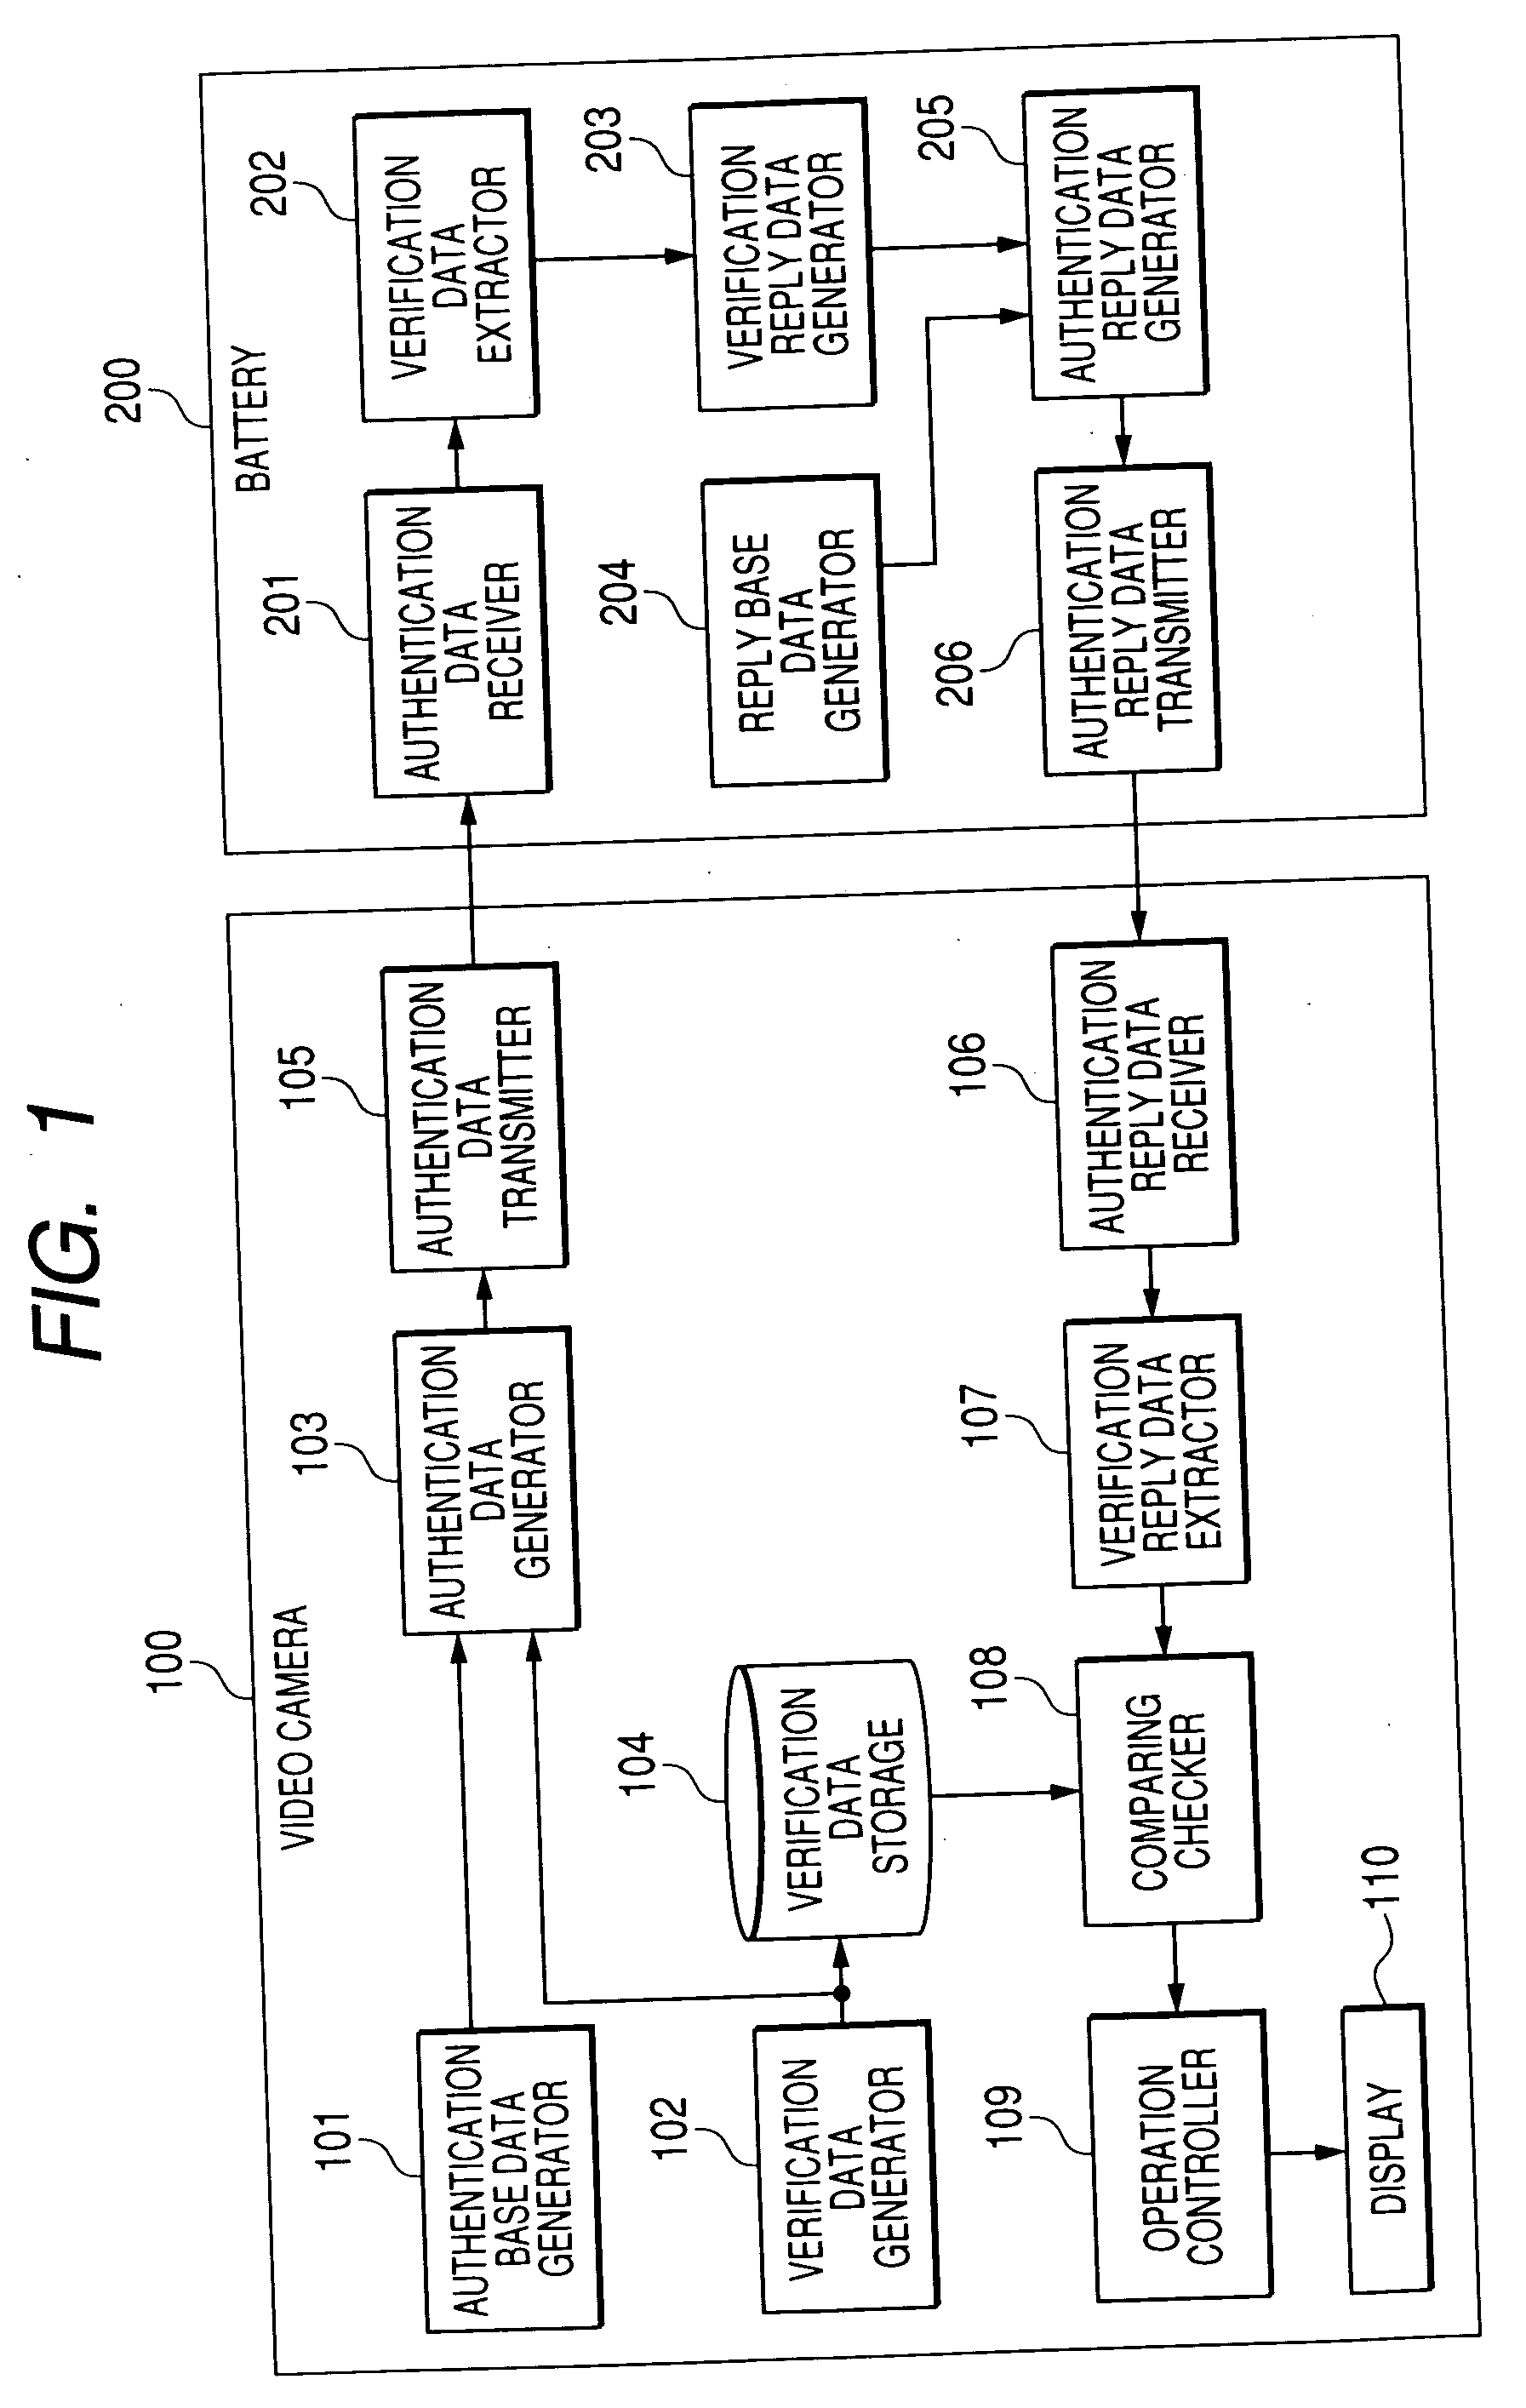 Device authentication system